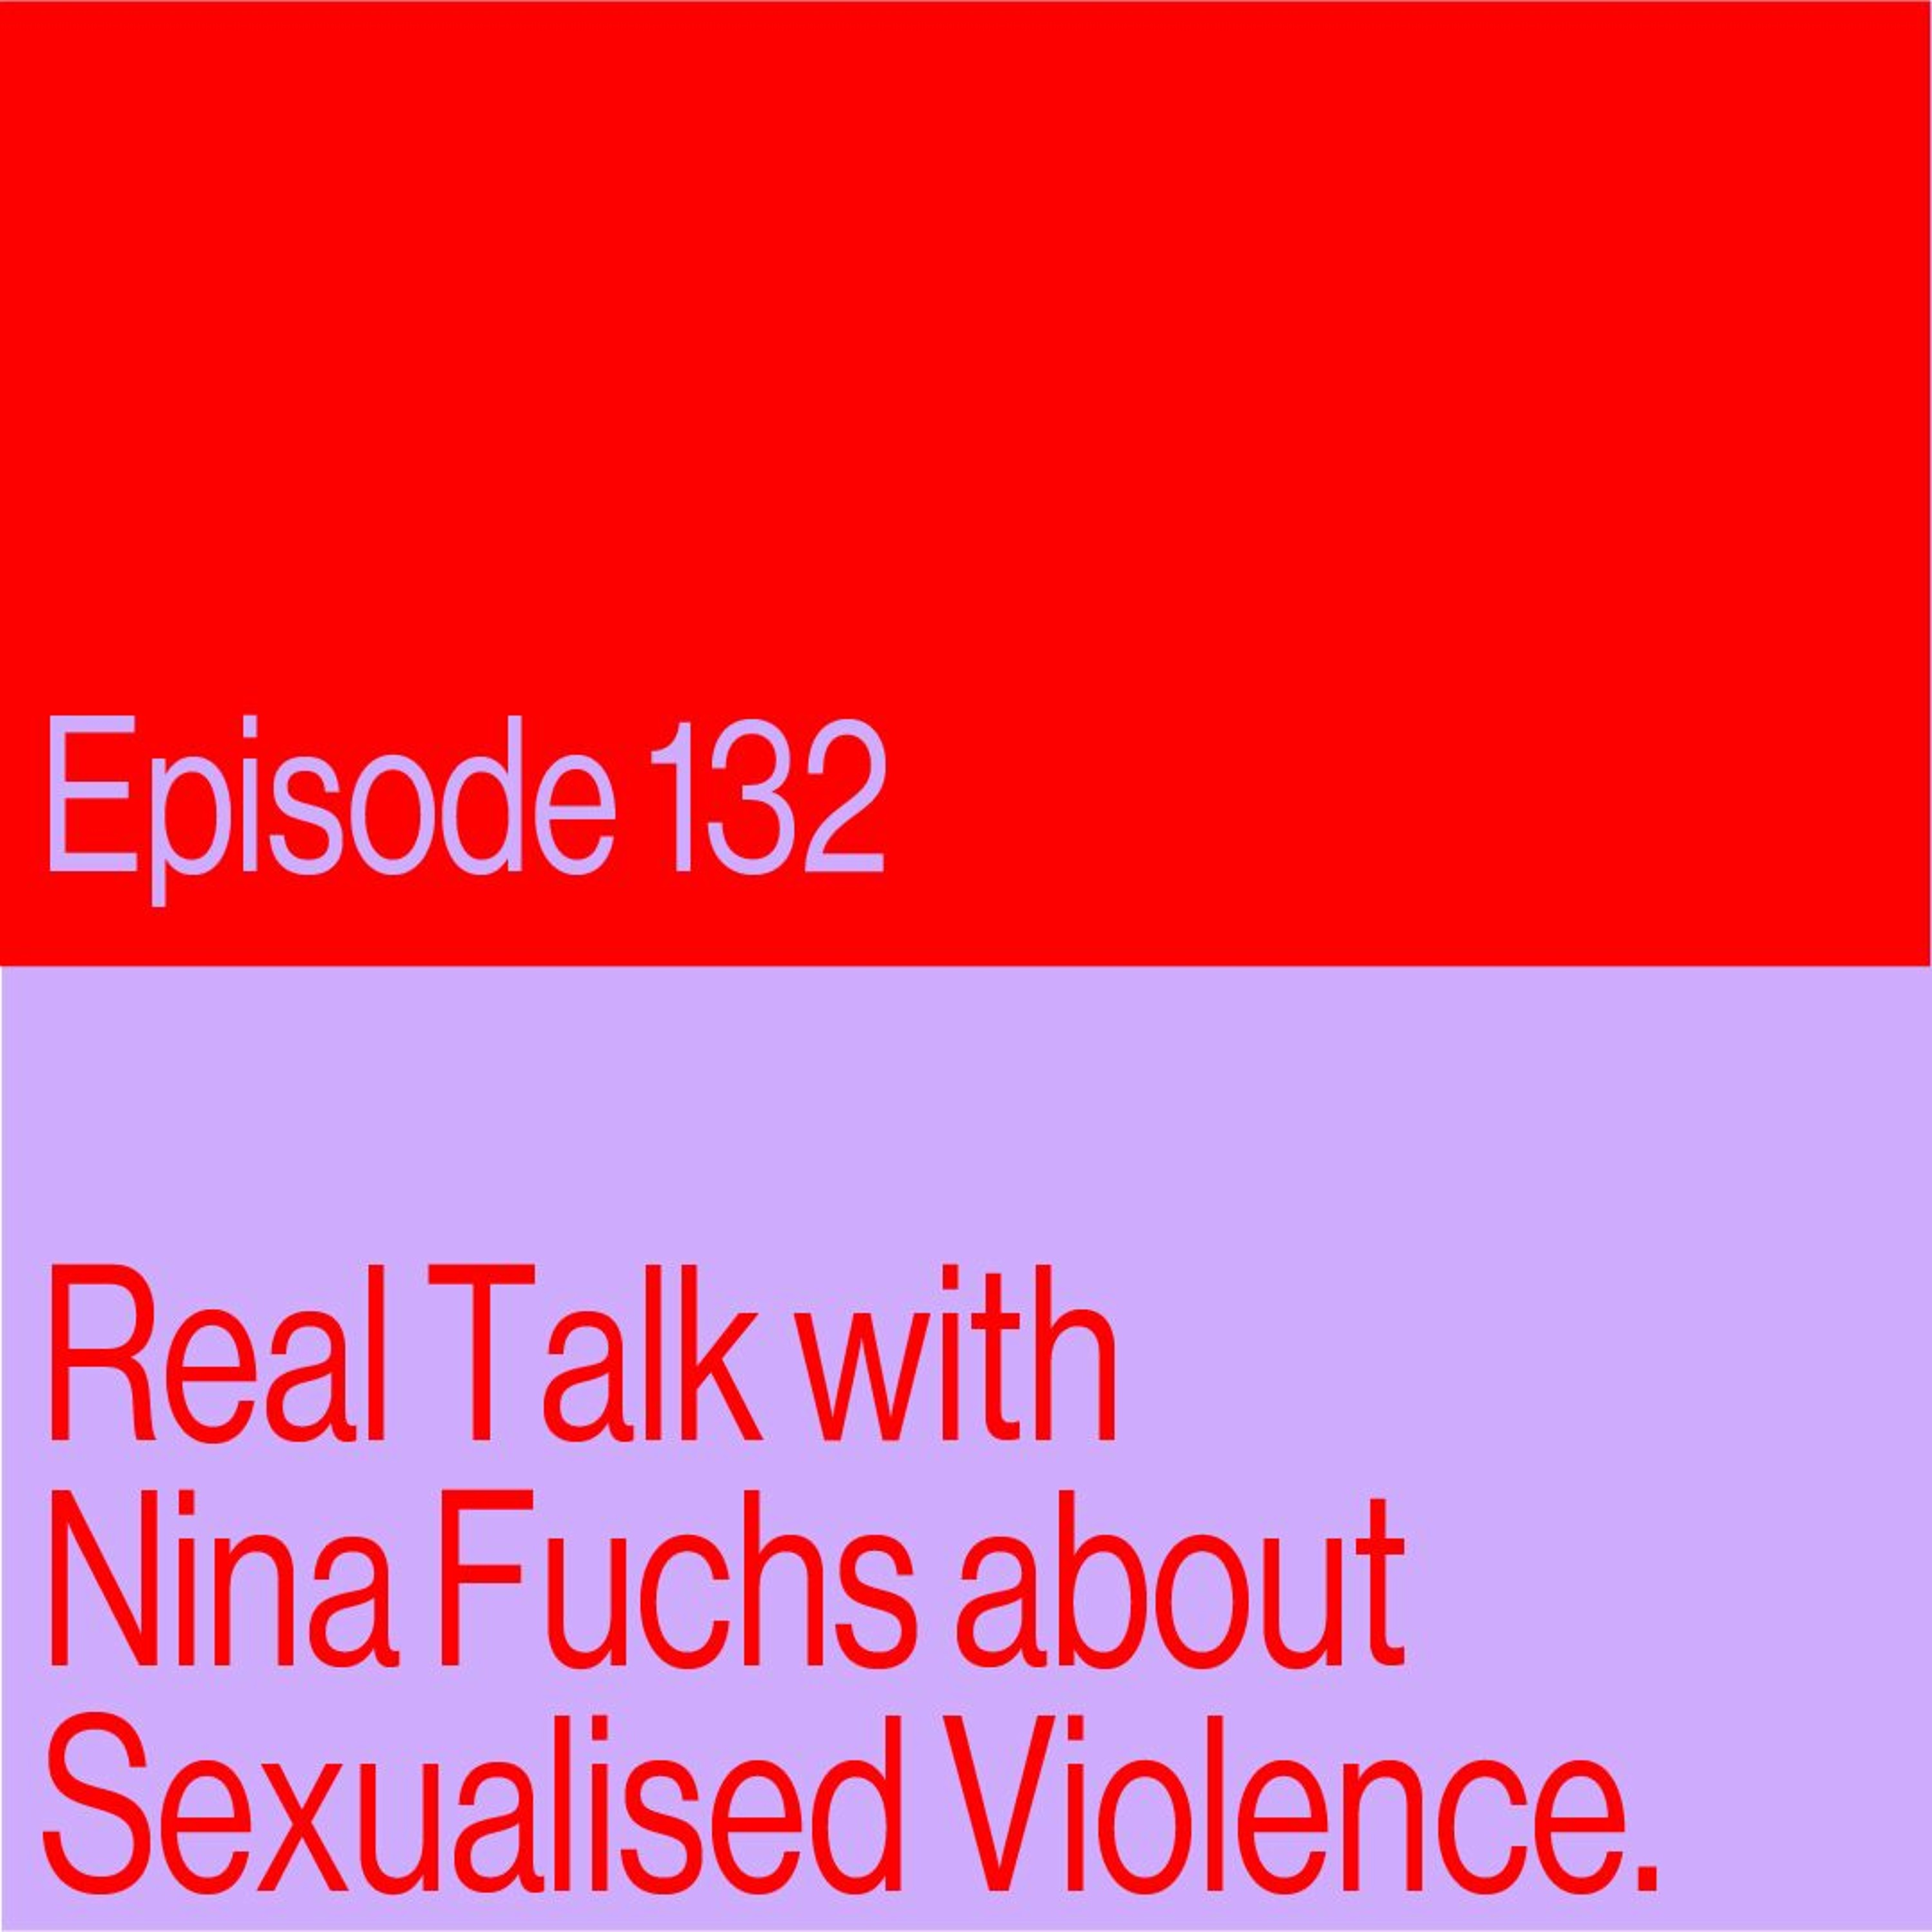 Episode 132: Real Talk with Nina Fuchs about Sexualised Violence